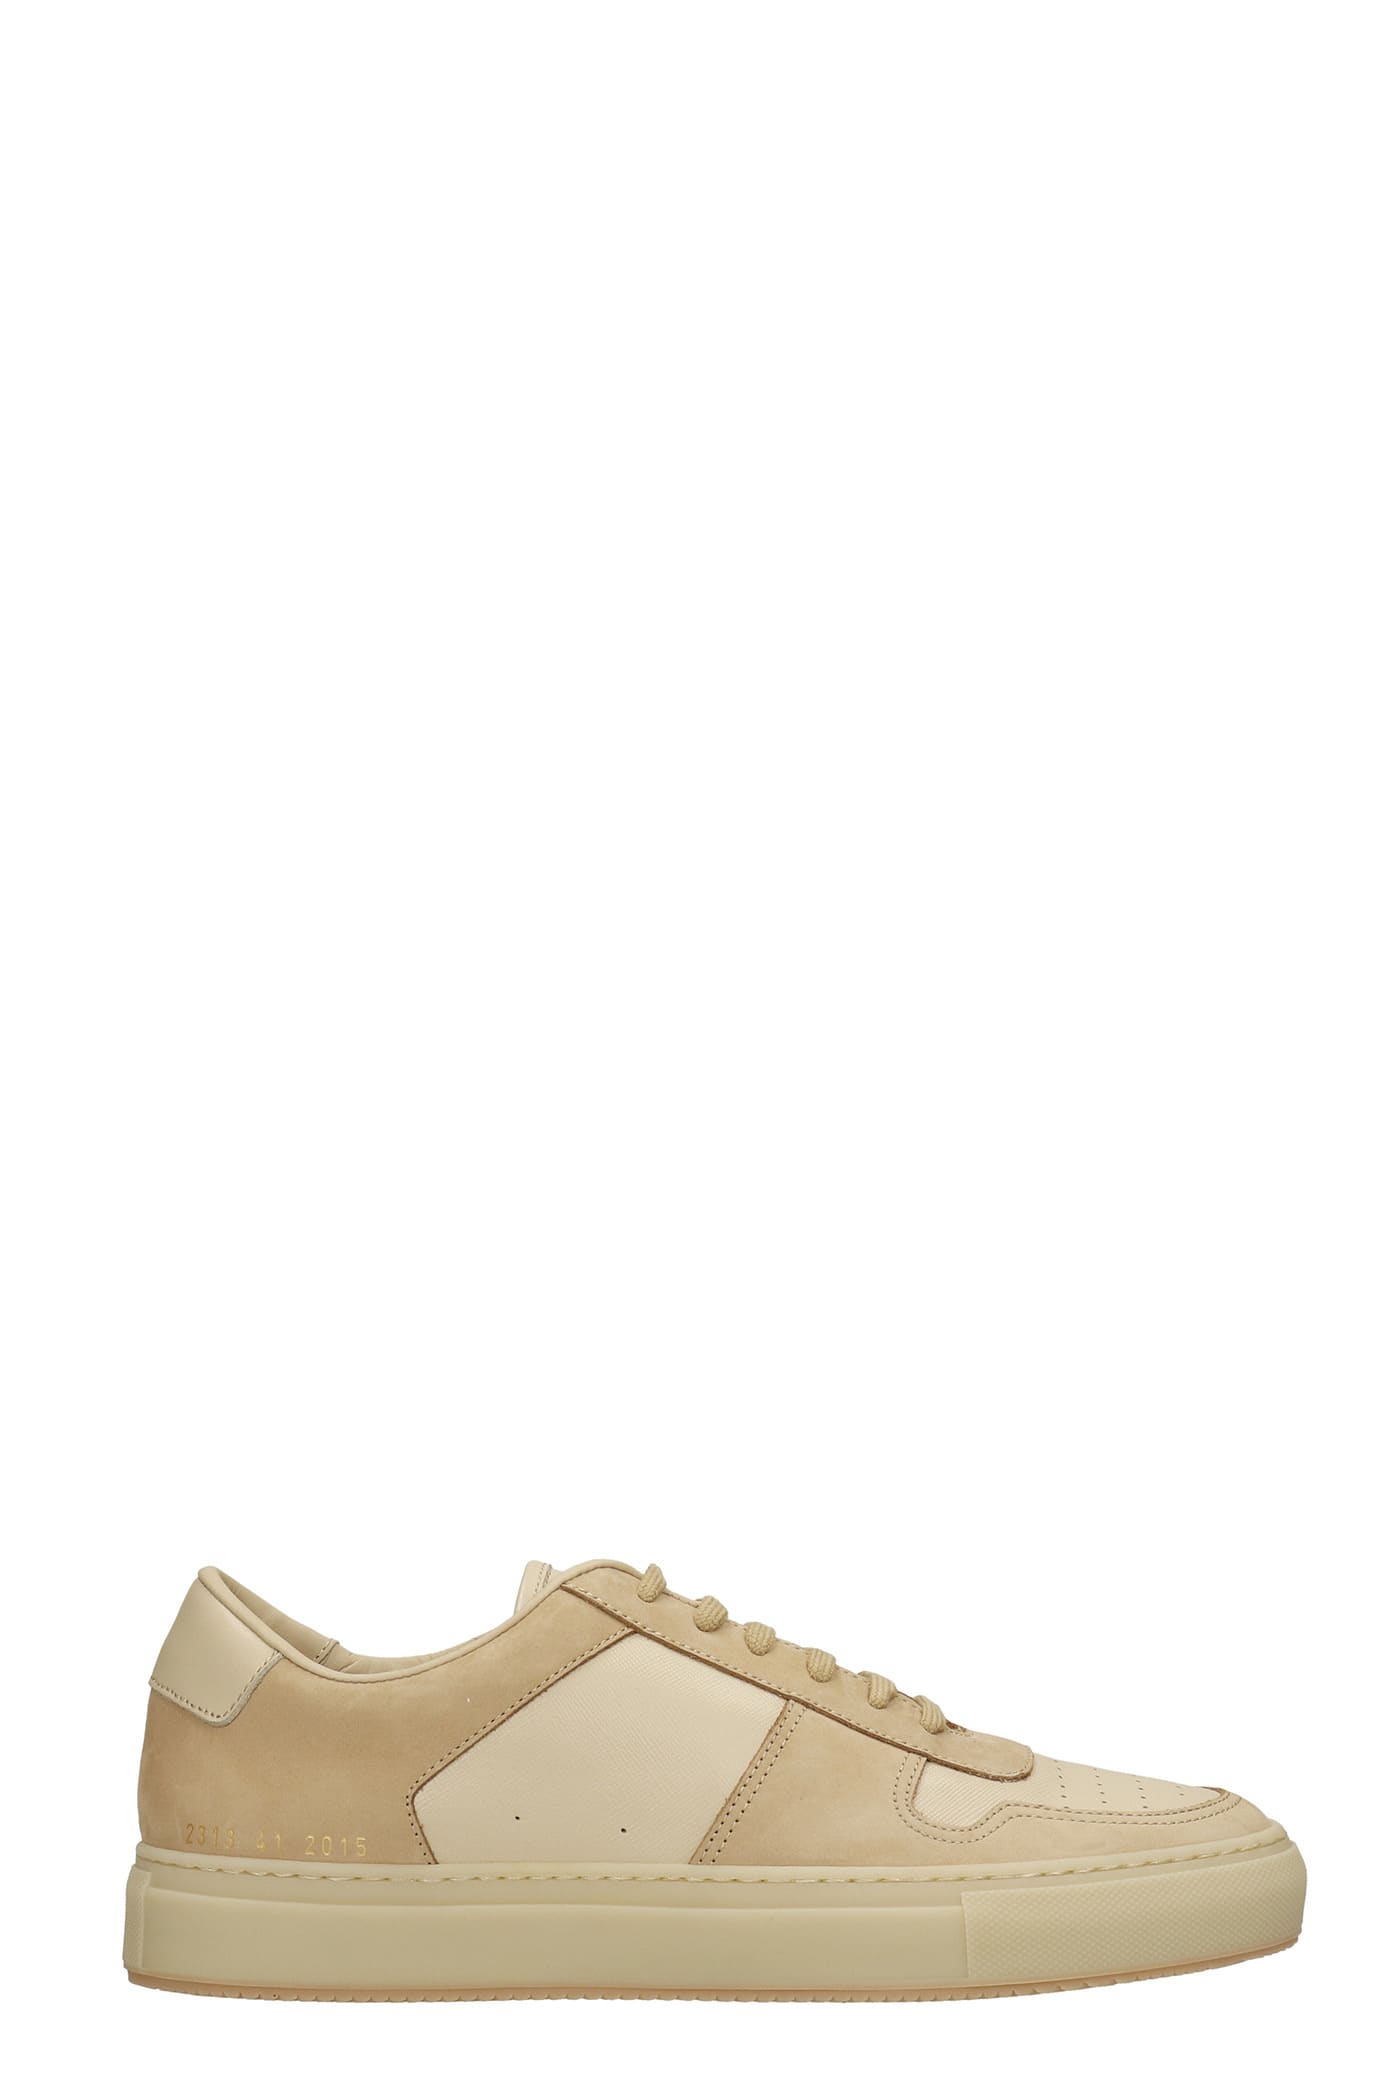 Common Projects Bball Low Sneakers In Powder Leather And Fabric